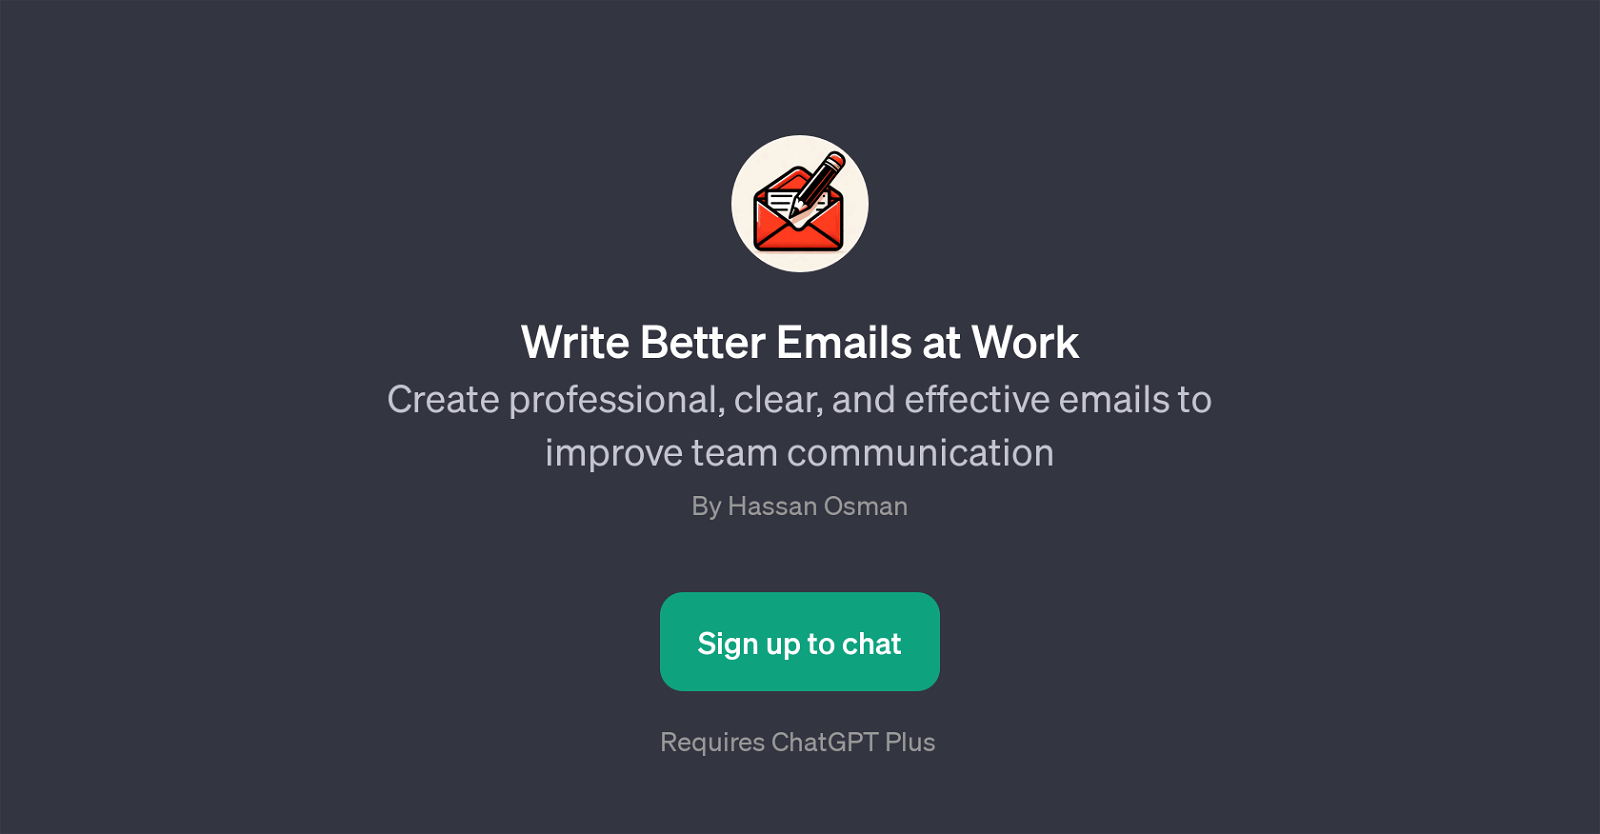 Write Better Emails at Work website